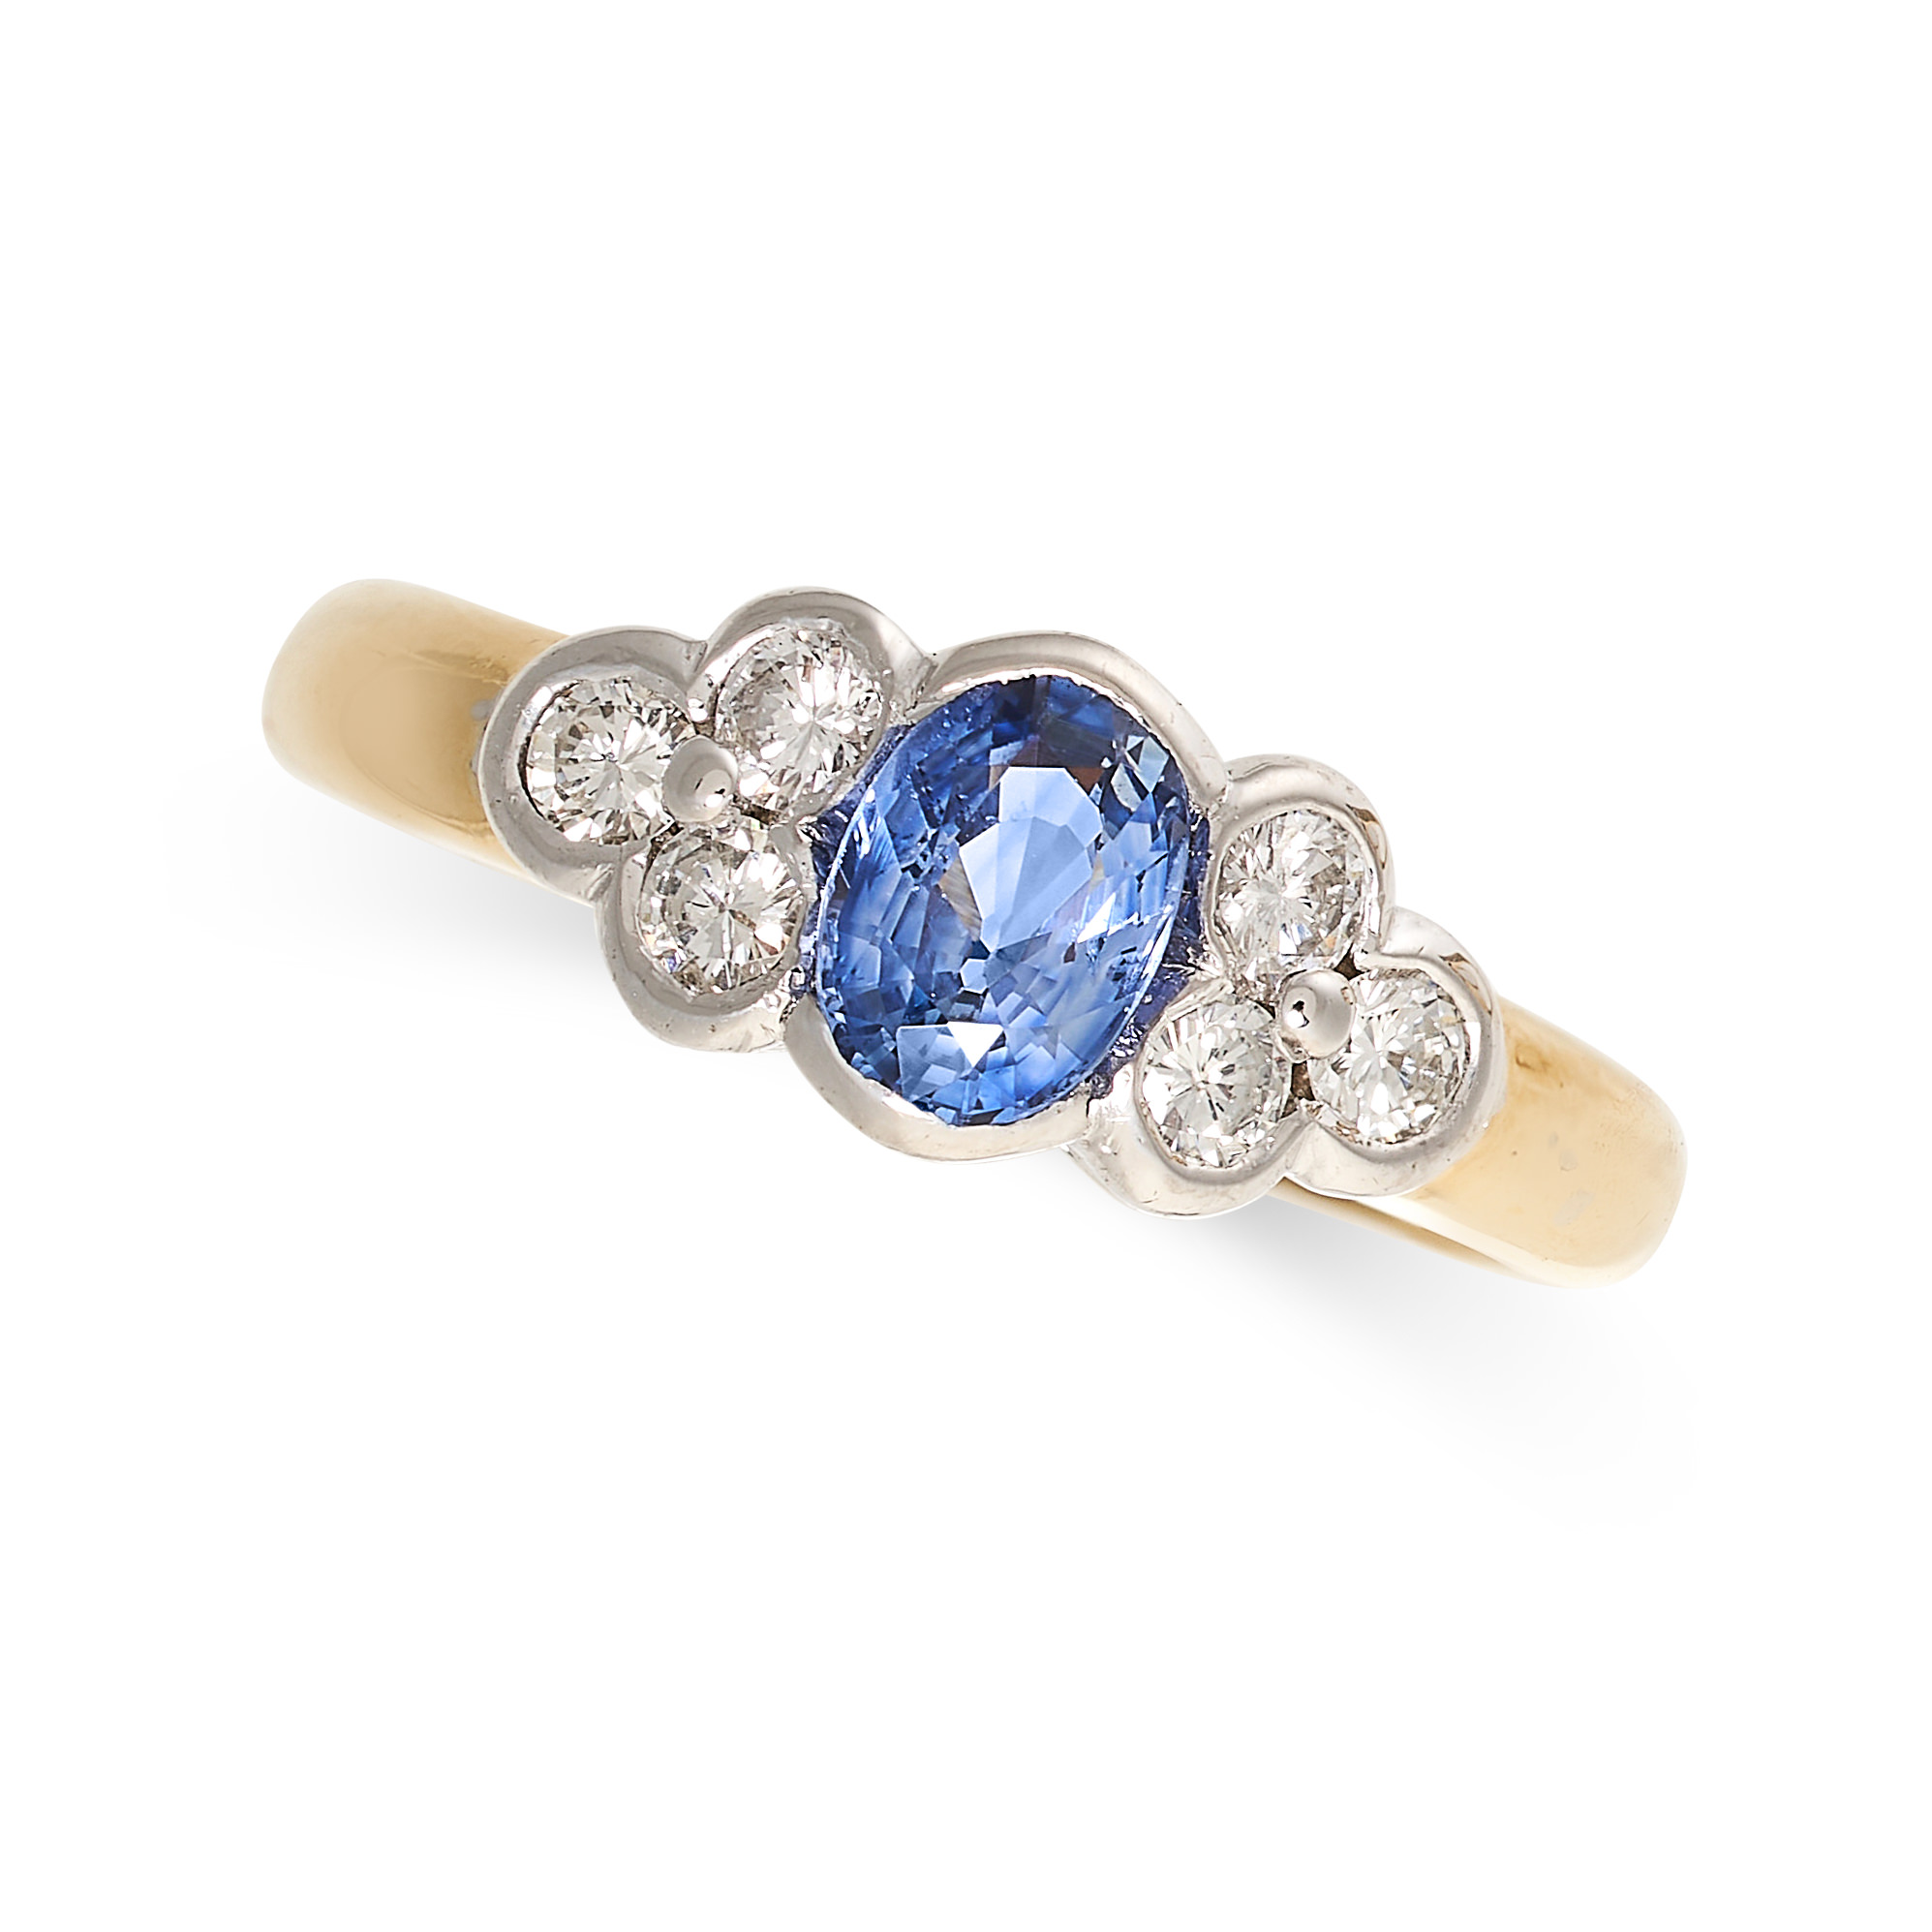 A SAPPHIRE AND DIAMOND DRESS RING in 18ct yellow gold and white gold, set with an oval cut blue